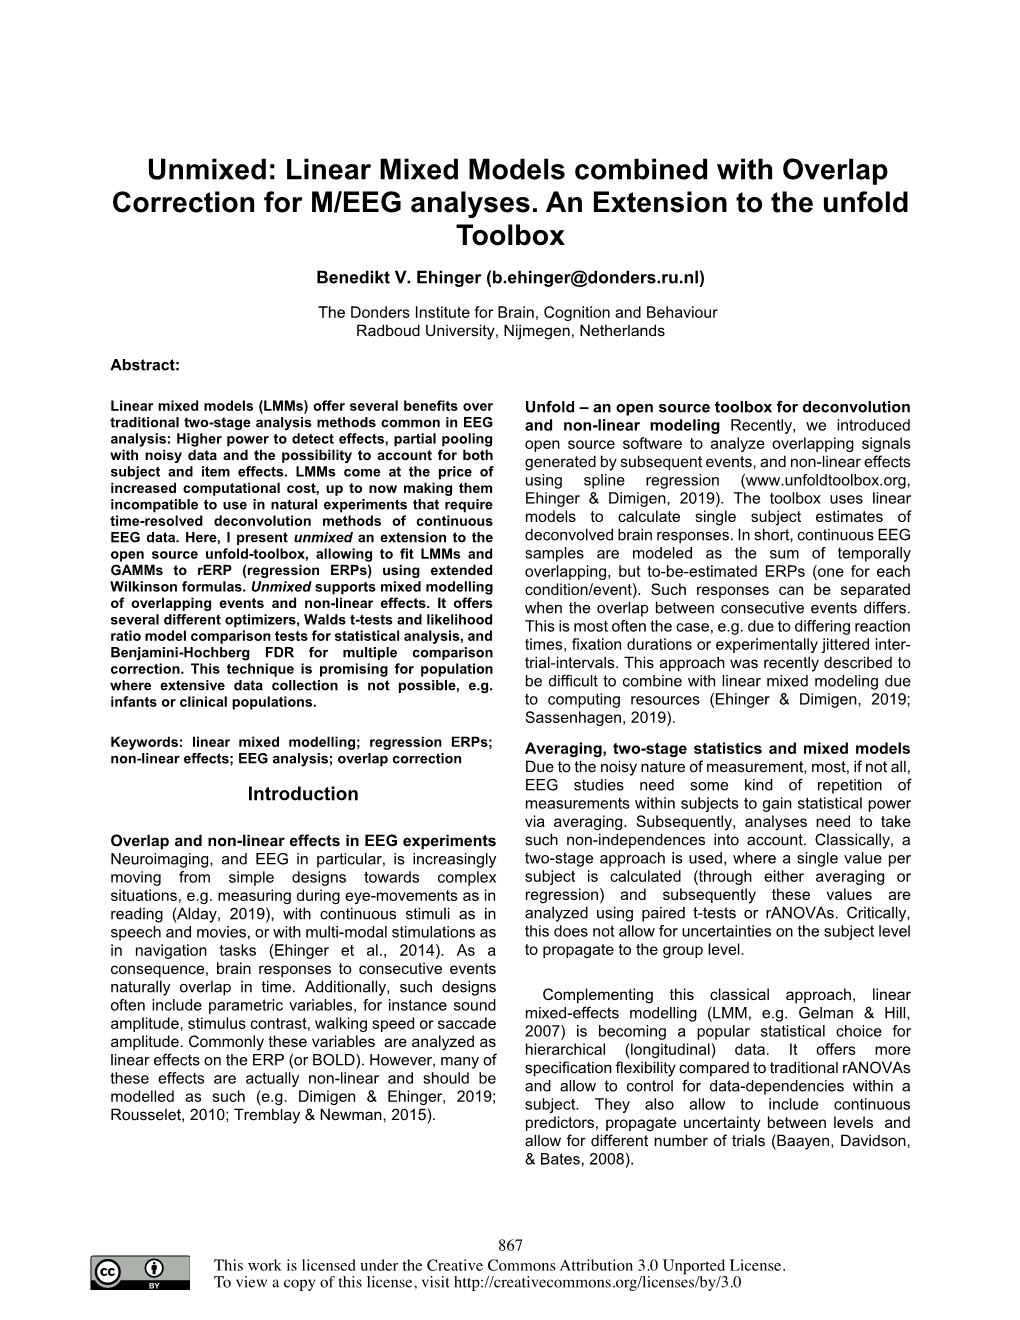 Linear Mixed Models Combined with Overlap Correction for M/EEG Analyses